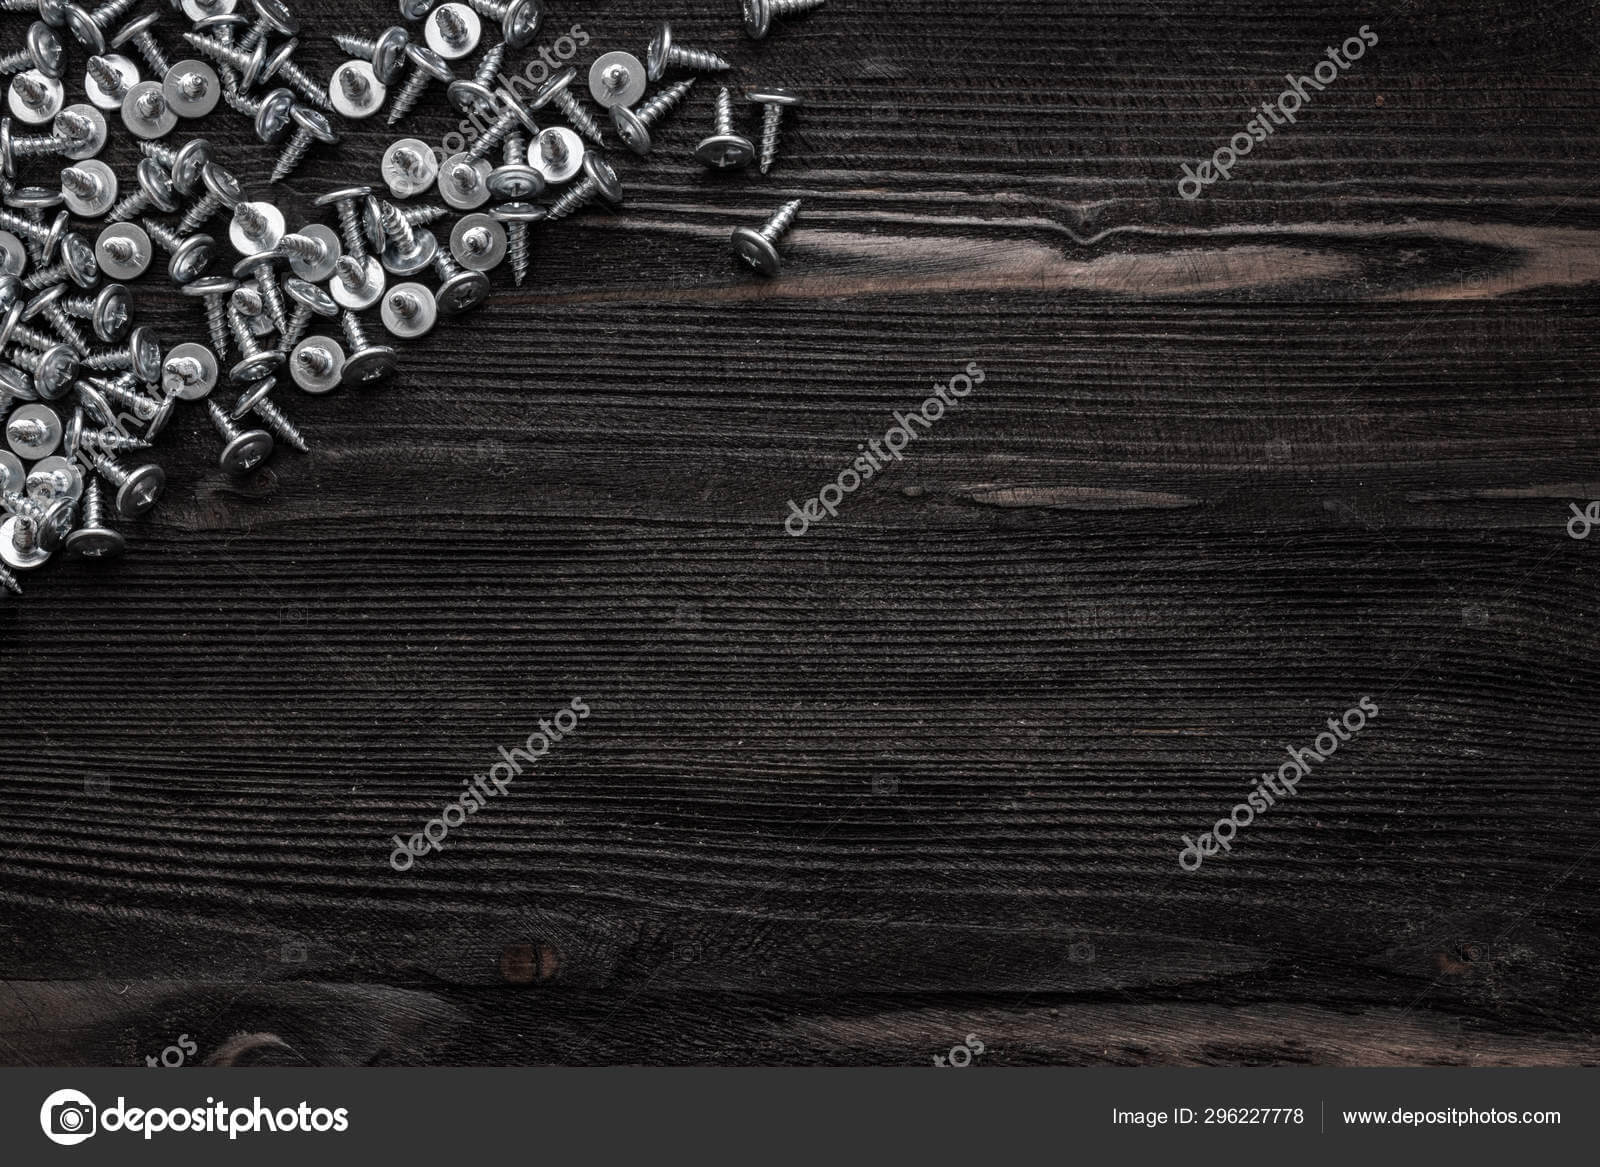 Some Wood Crews On Dark Wooden Desk Board Surface. Top View Within Borderless Certificate Templates